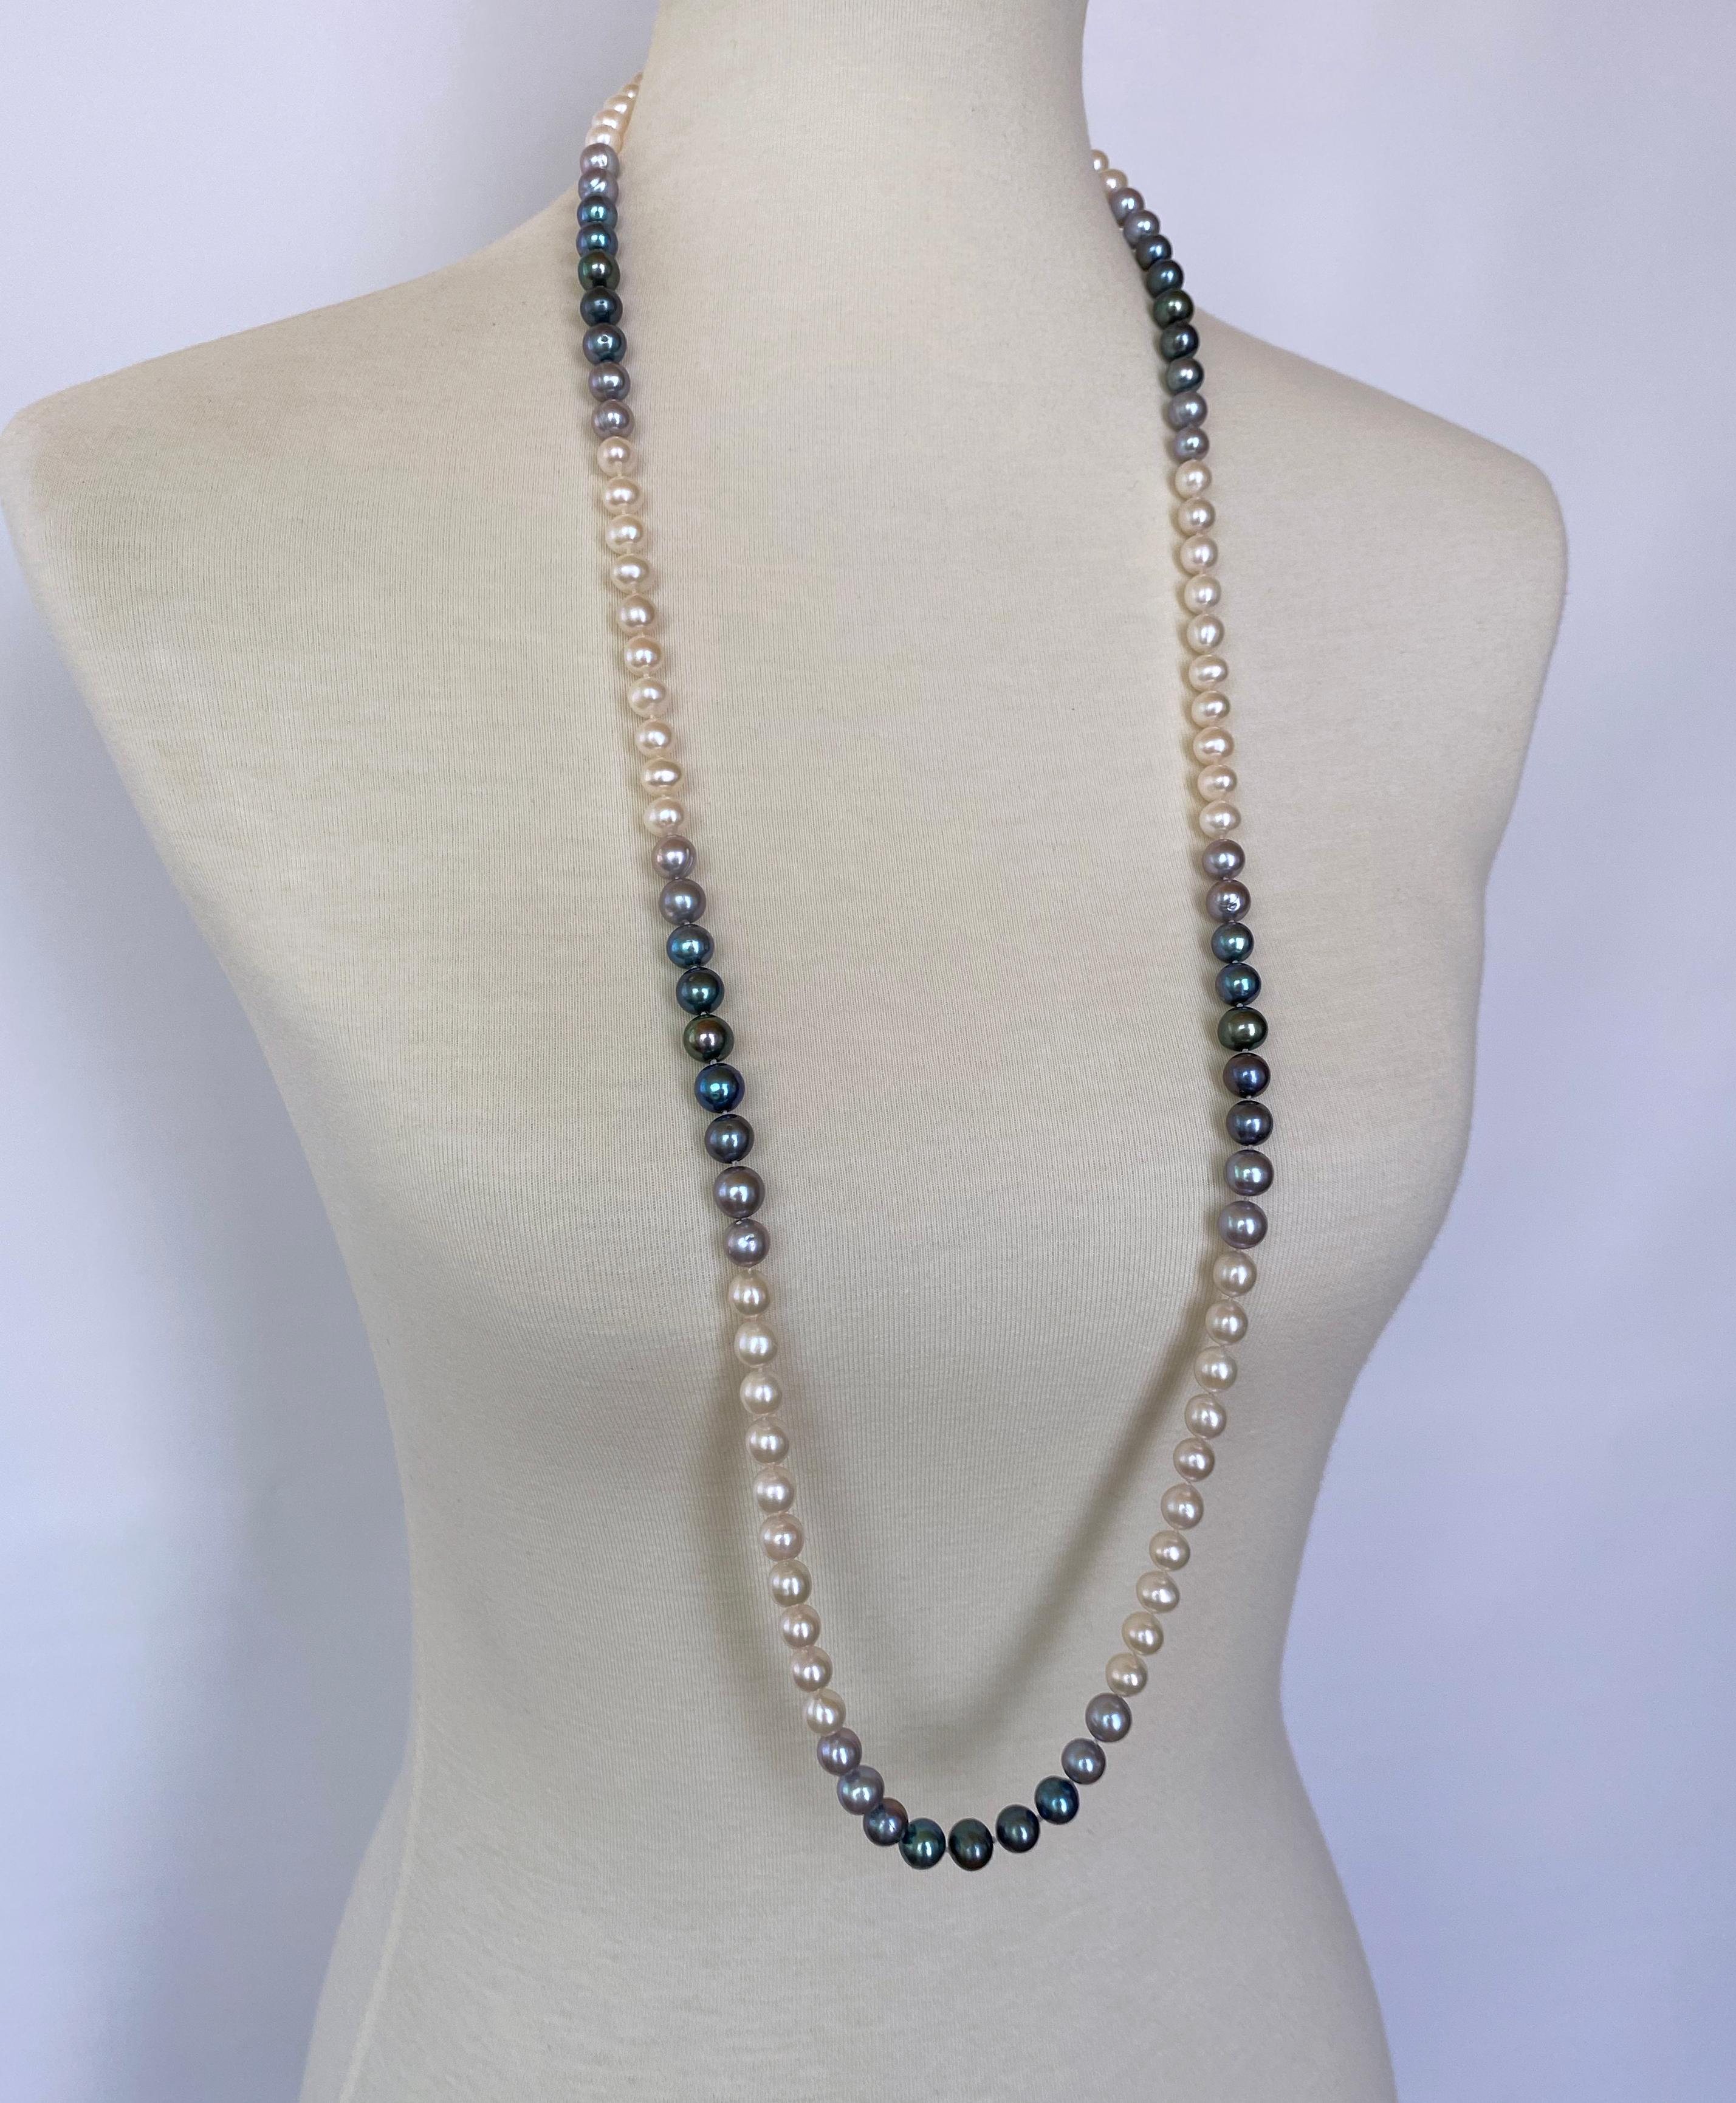 Gorgeous long woven Pearl Ombre necklace by Marina J. This beautiful piece features all Cultured White, Grey and Black Pearls which display radiant iridescence; and has 4 strung graduations of Gradients woven throughout. Measuring 39 inches long,